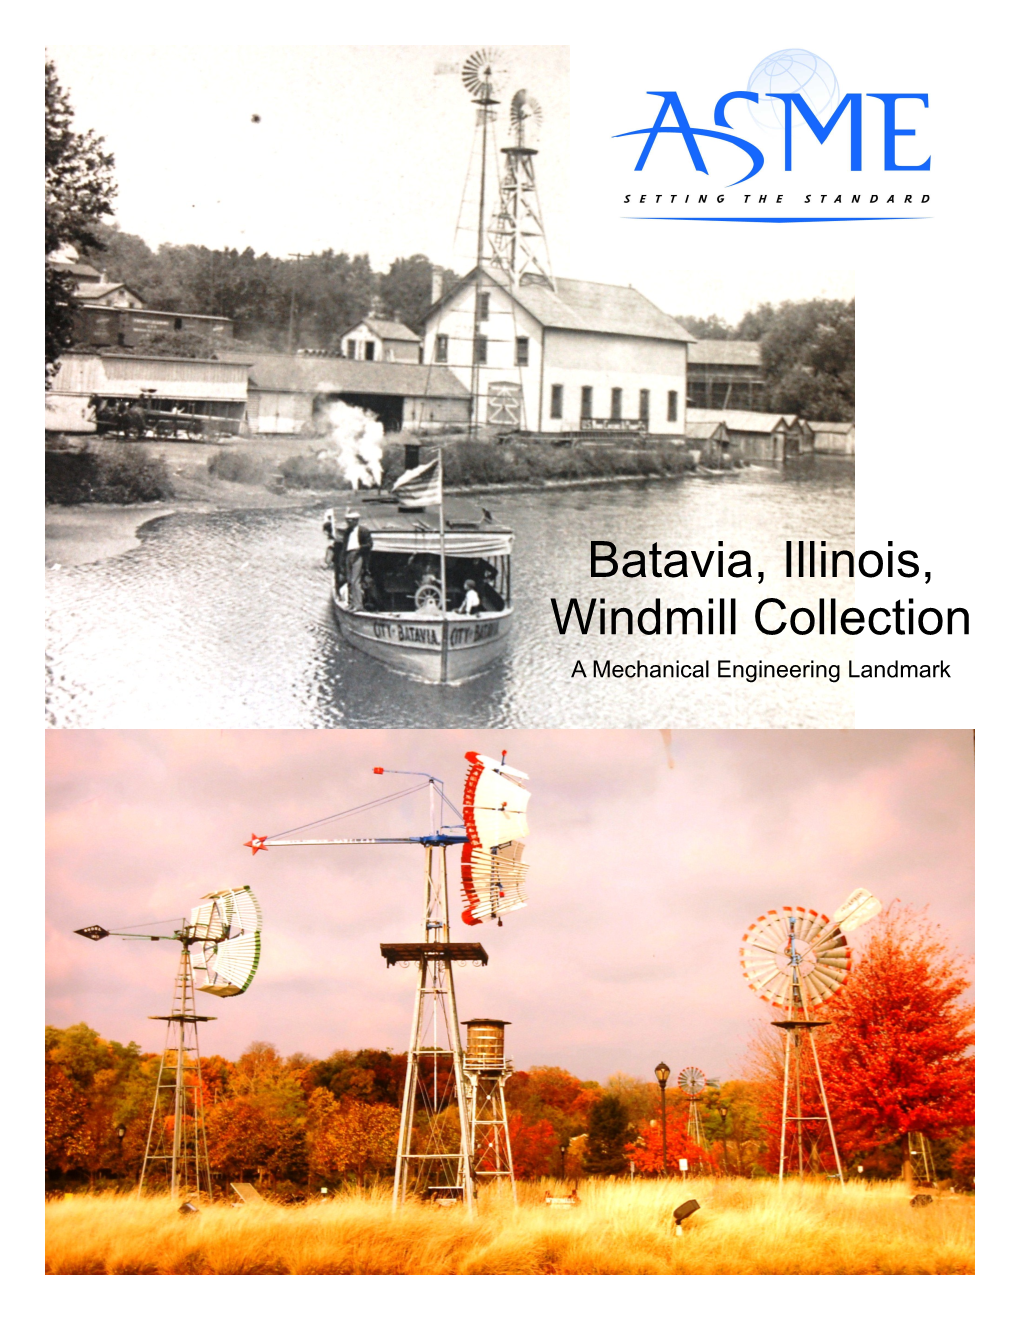 Batavia, Illinois, Windmill Collection a Mechanical Engineering Landmark Overview Had Invented the Self-Regulating Wind Engine in 1854